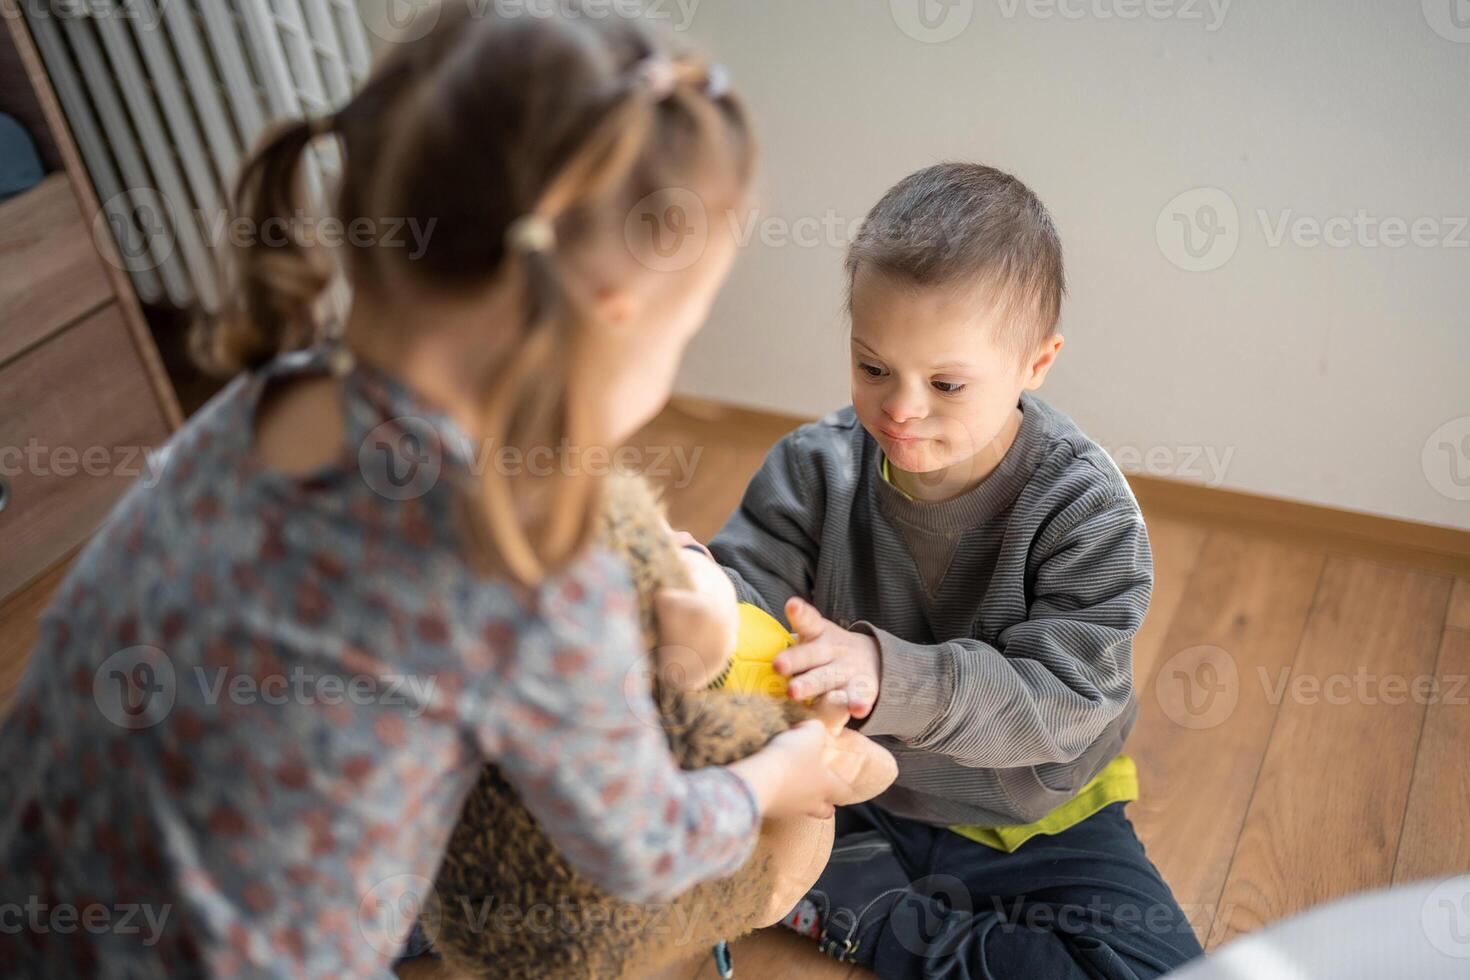 Small boy with down syndrome plays with his younger sister in home bedroom. High quality photo